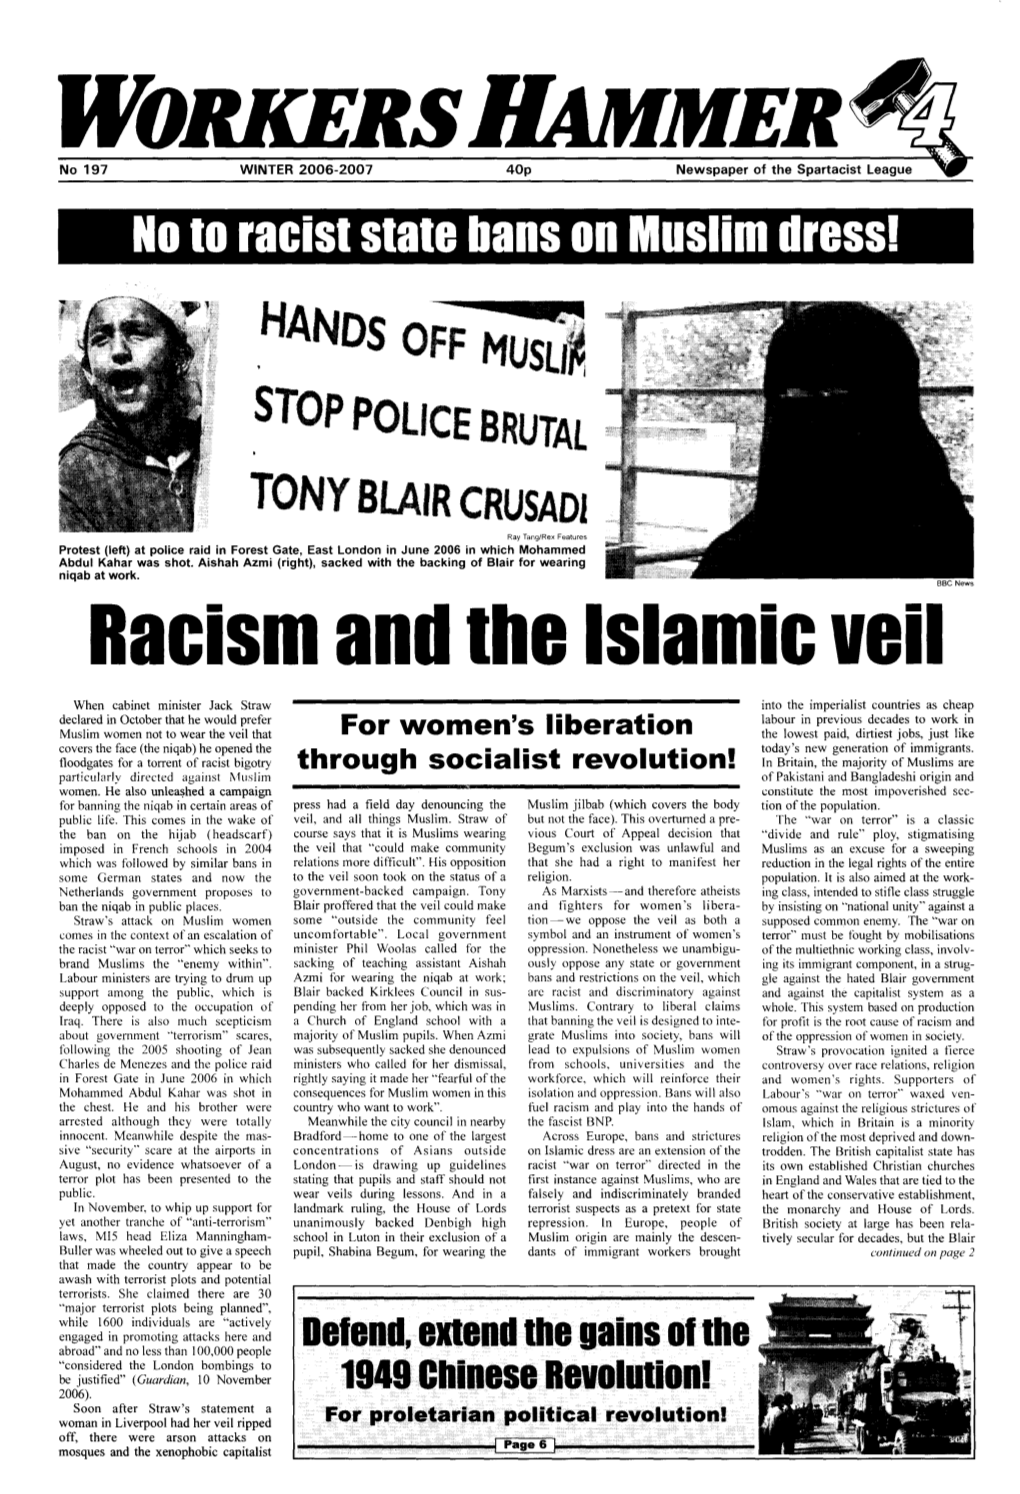 Racism and the Islamic Veil